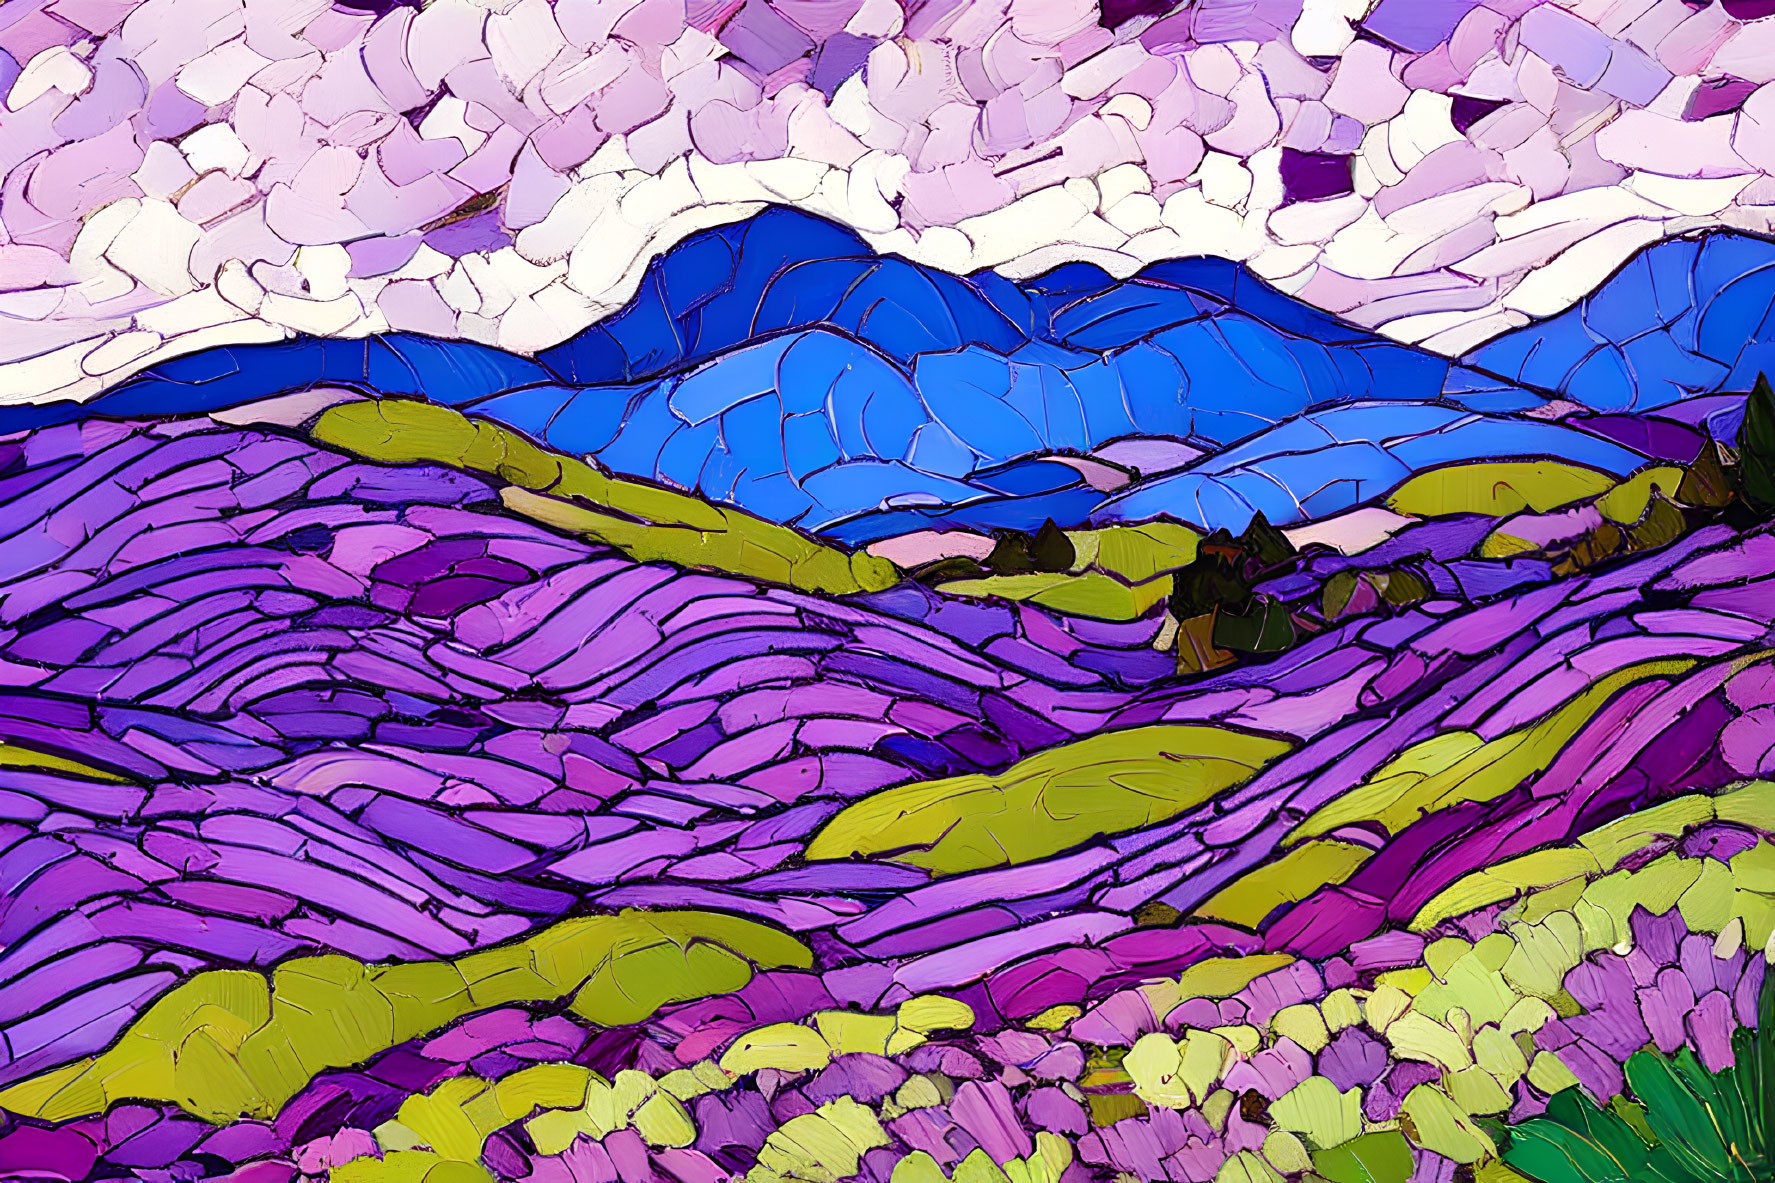 Colorful Mosaic-Style Illustration of Rolling Hills and Pastel Sky